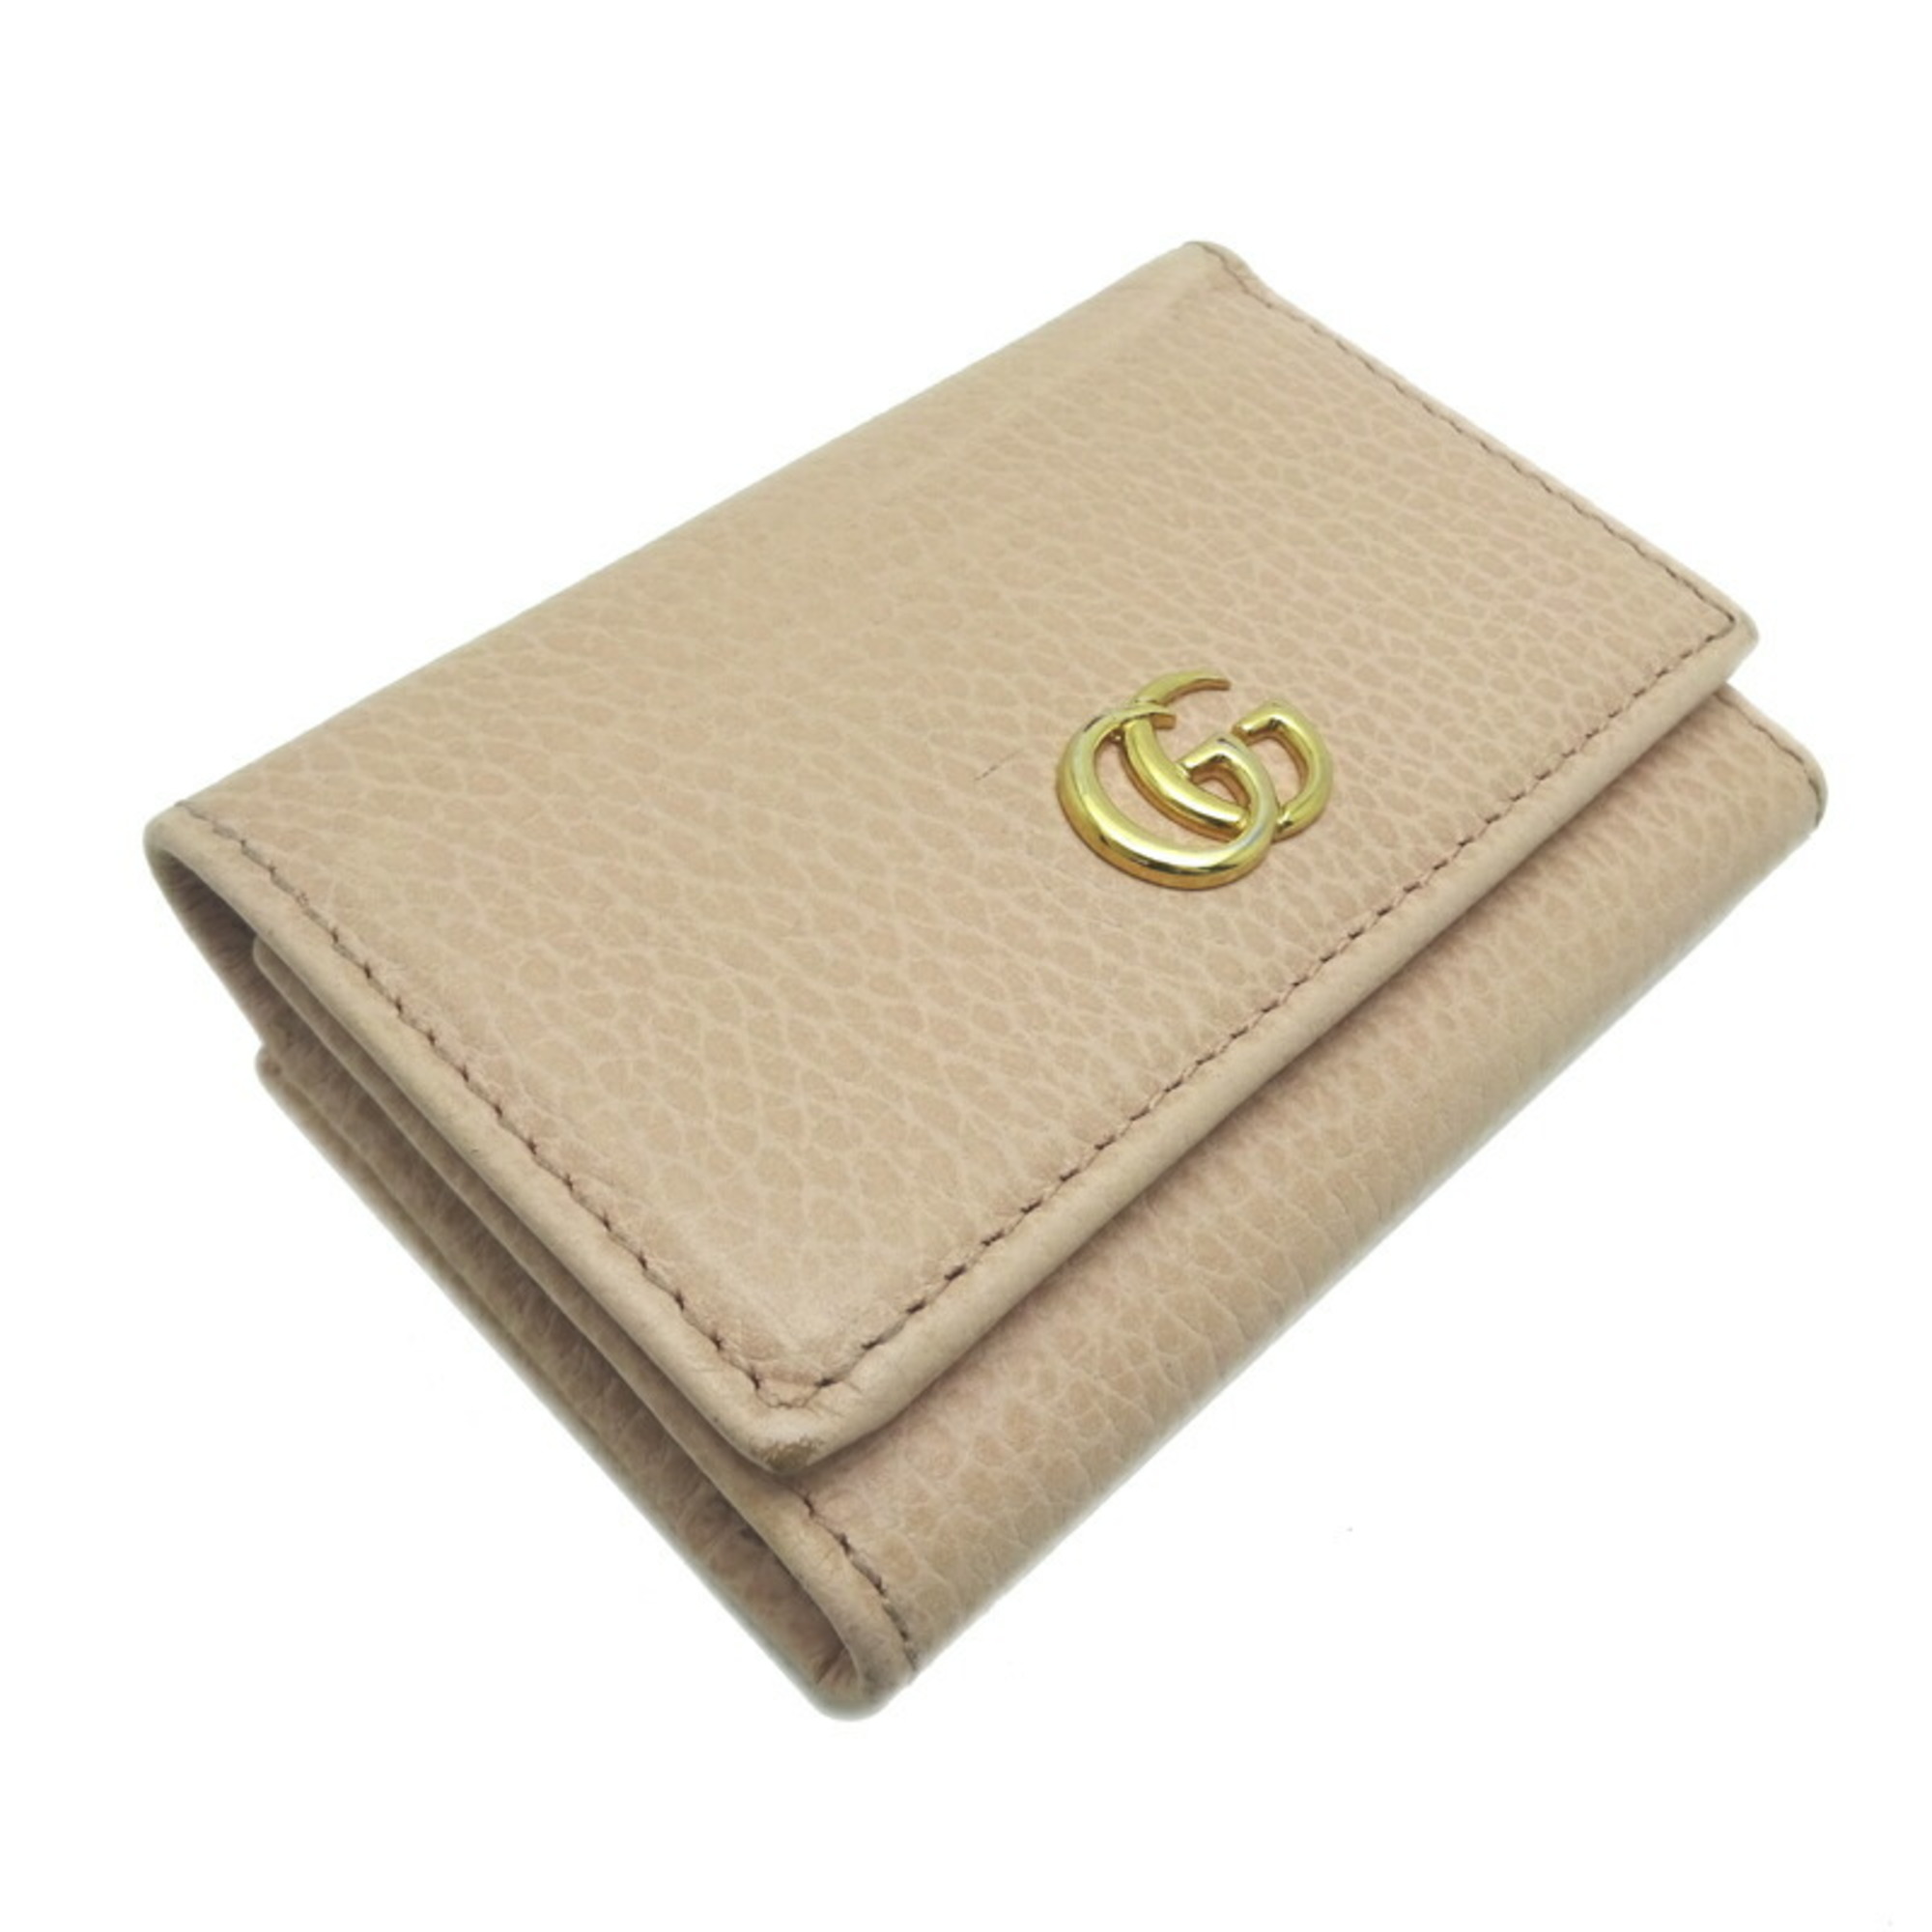 Gucci GG Marmont Compact Wallet Women's Tri-fold 644407 Leather Pink